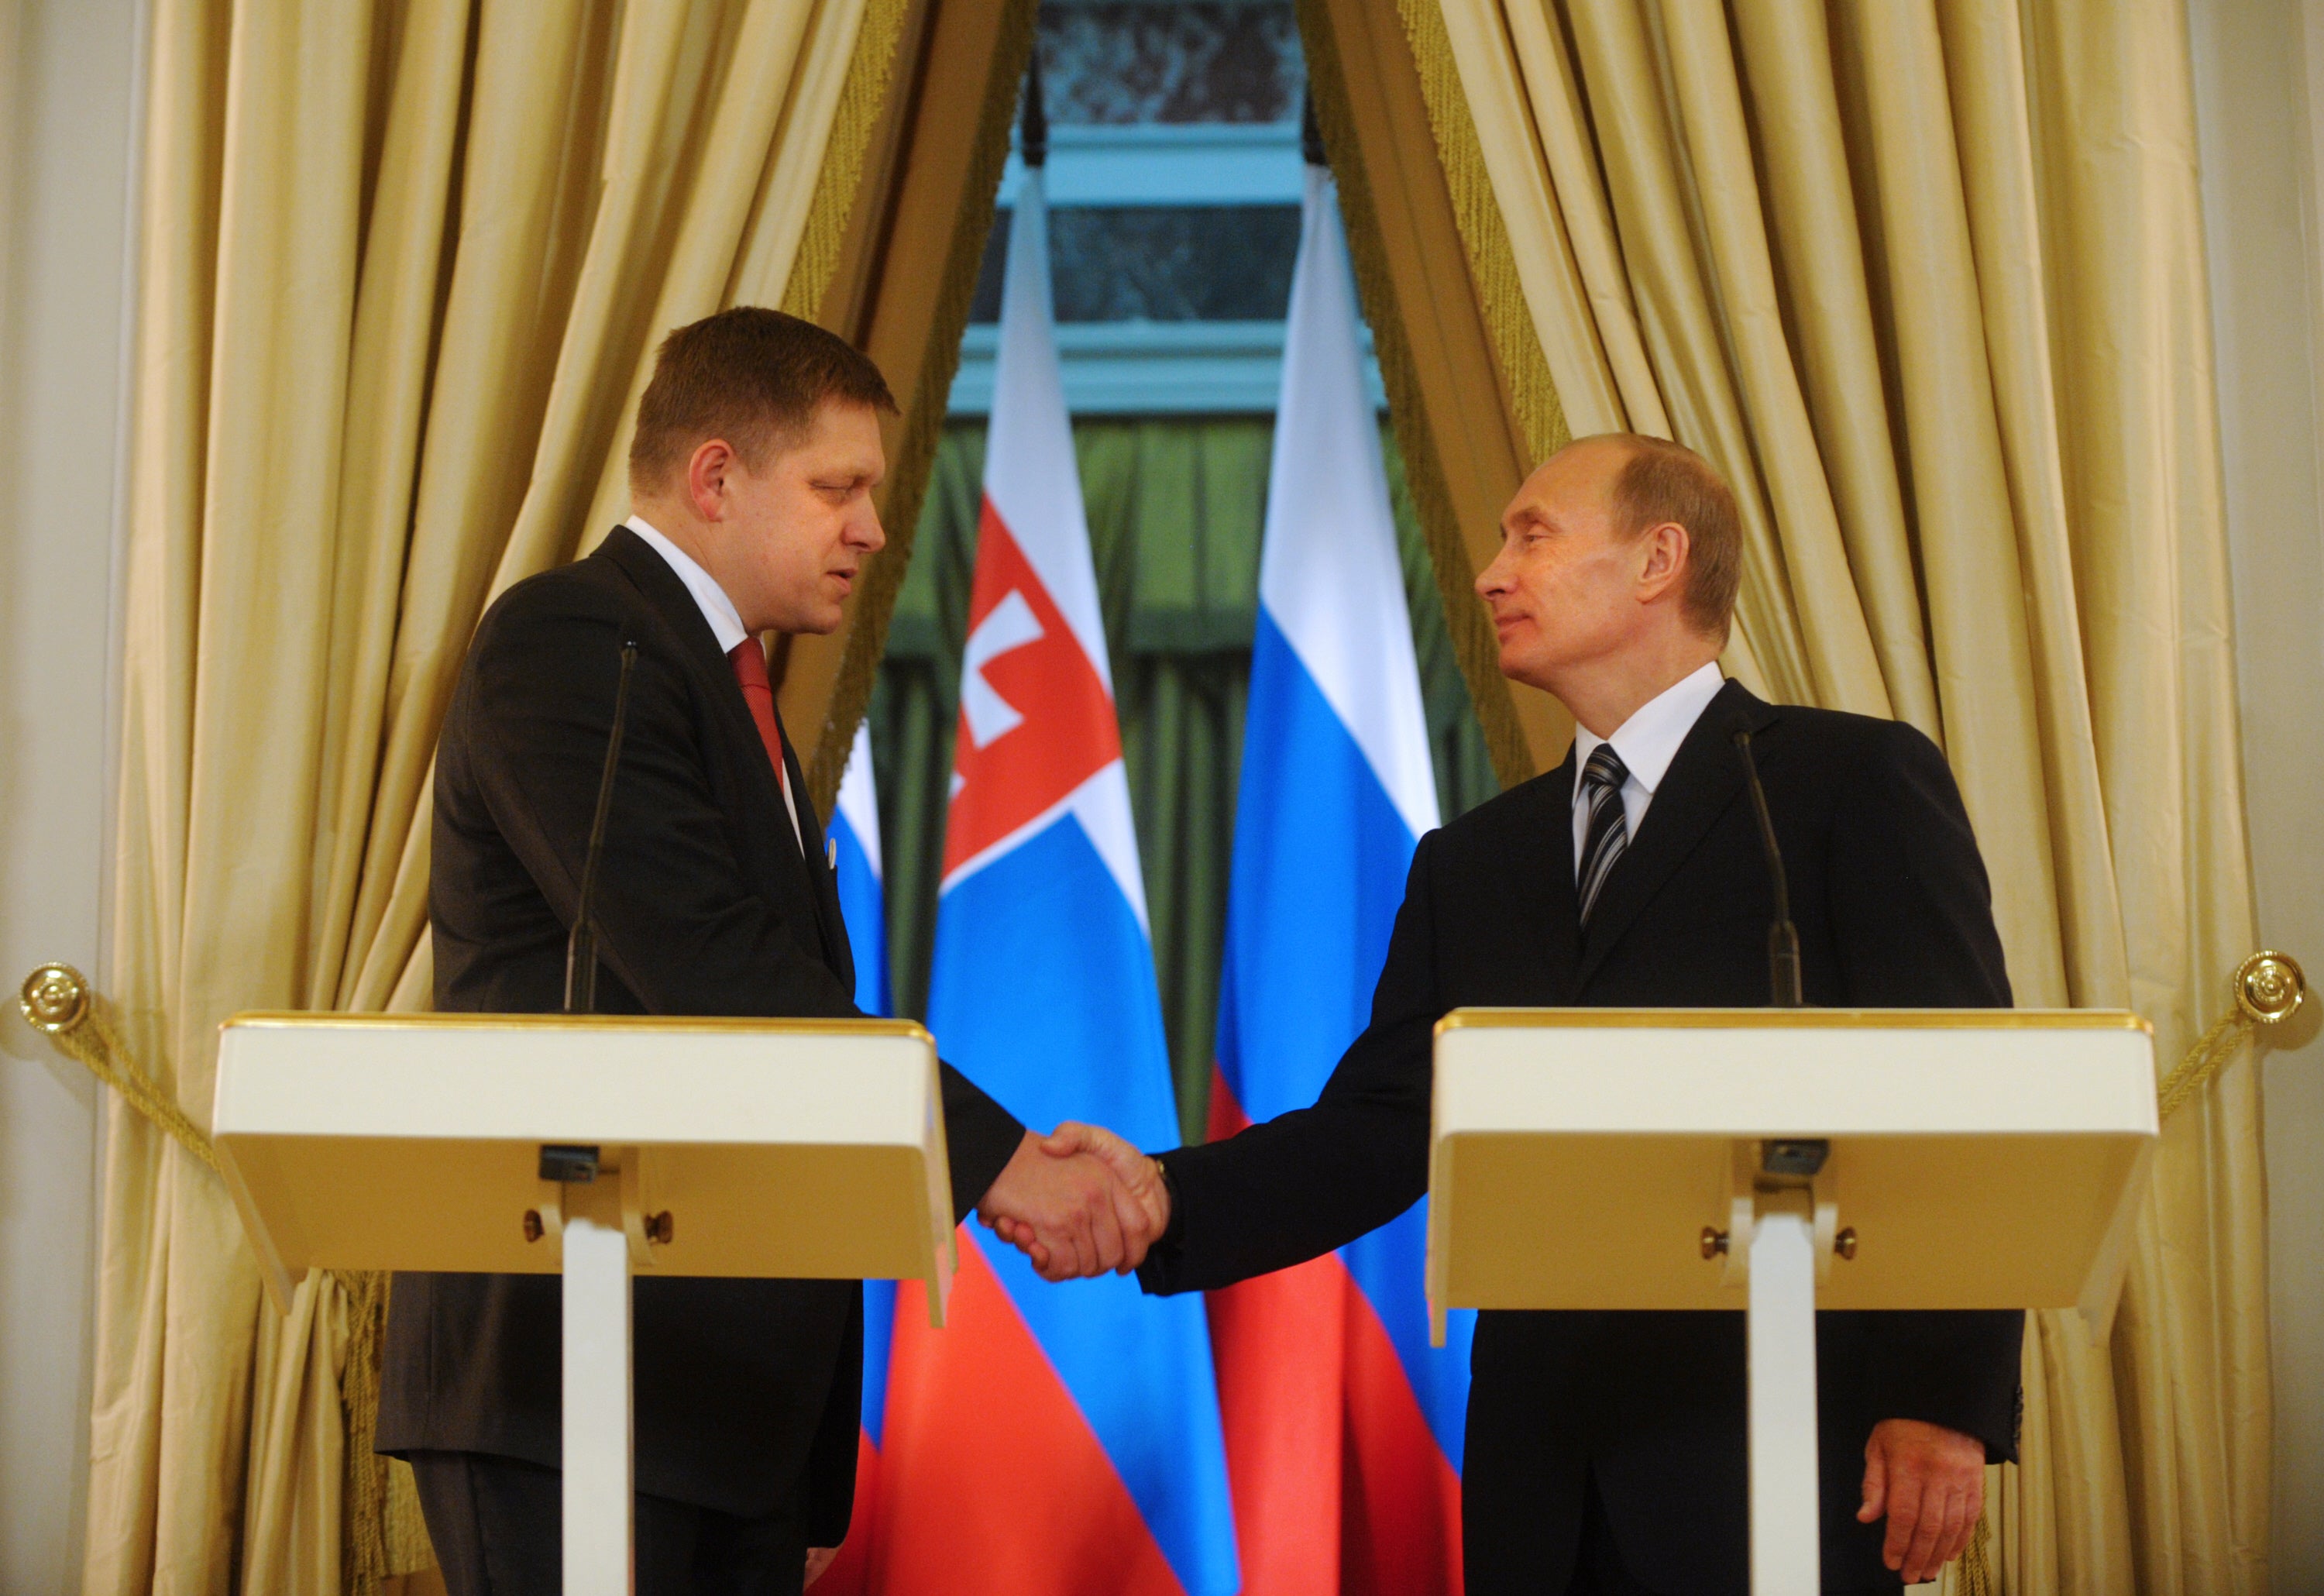 Russian prime minister Vladimir Putin shakes hands with Slovakian prime minister Robert Fico during a press conference in Moscow on 16 November 2009